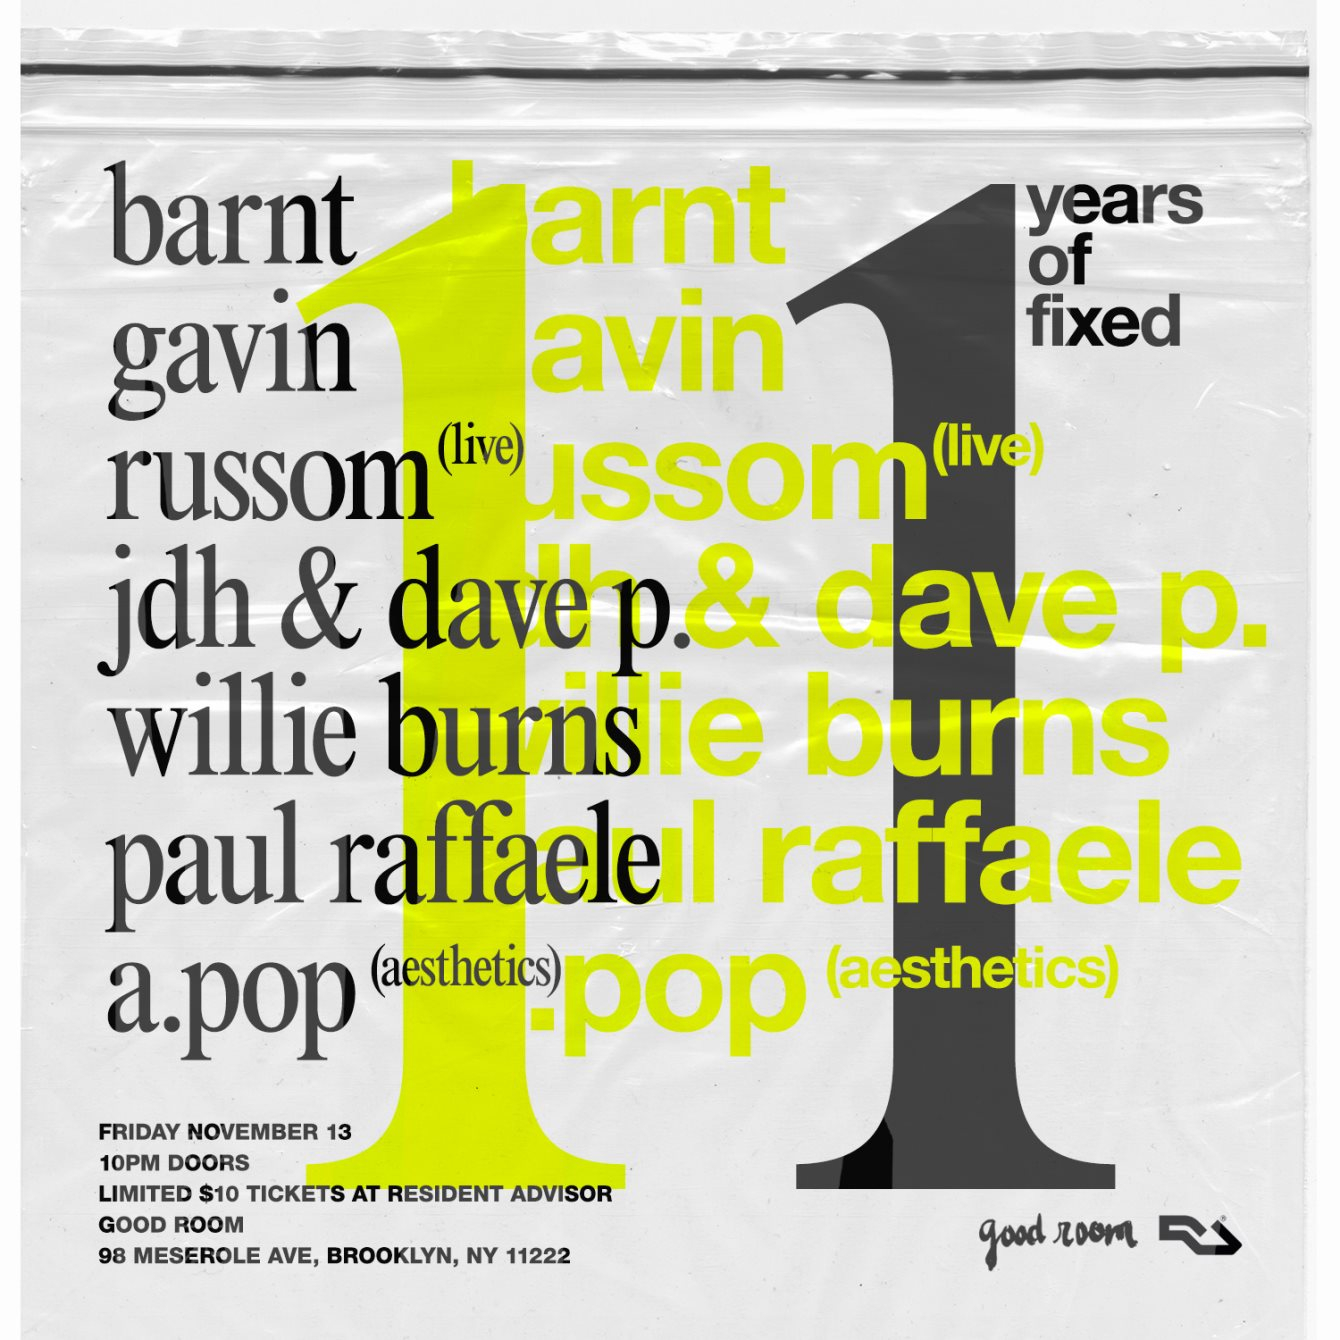 Fixed 11th Anniversary with Barnt, Gavin Russom (Live), Willie Burns & More - Flyer front